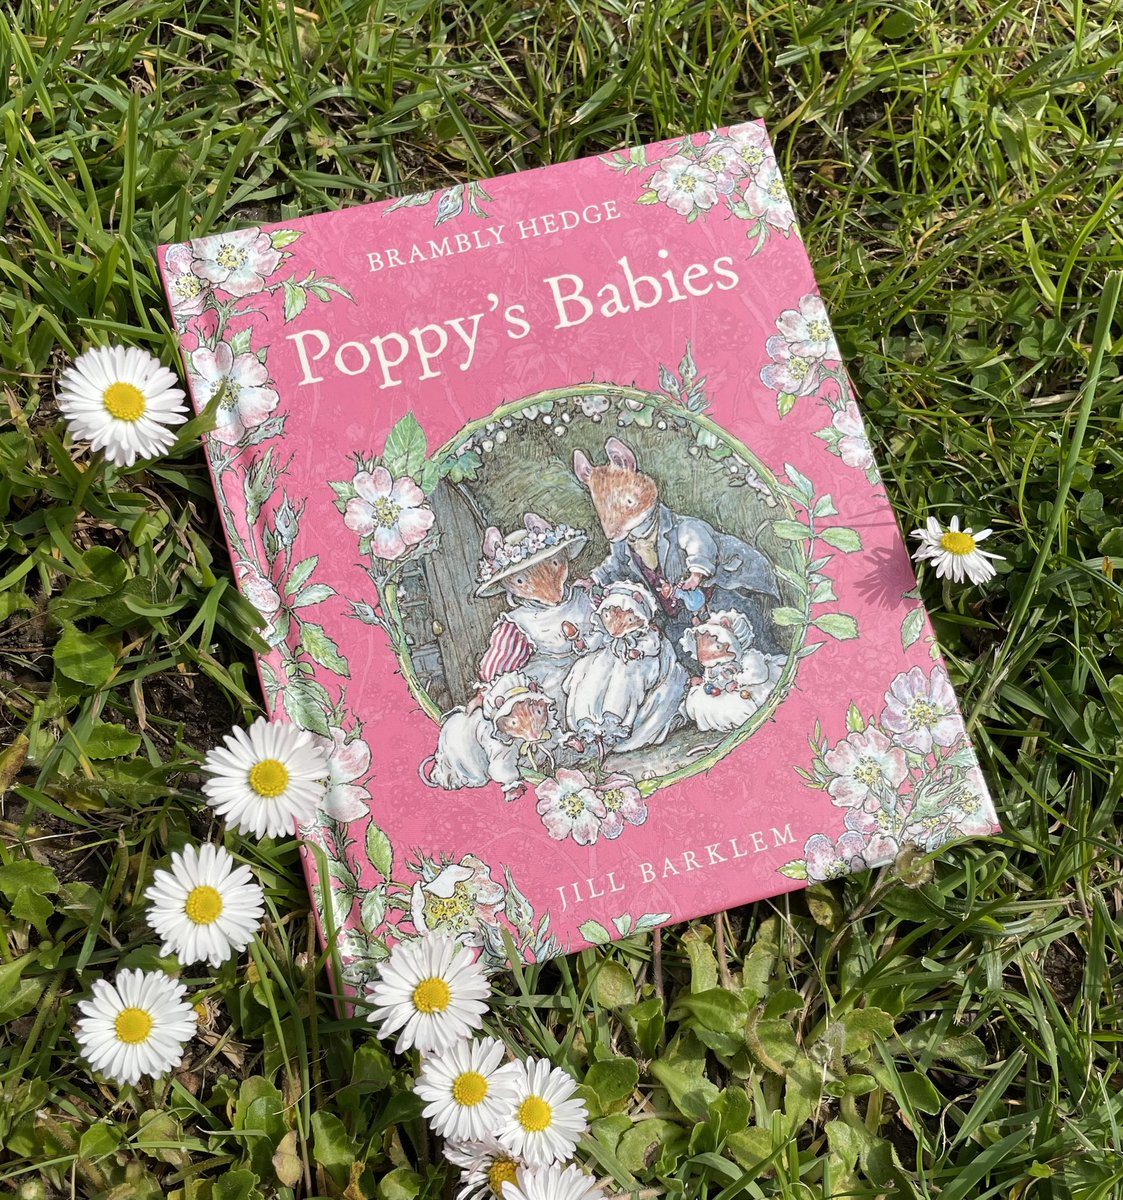 We’re celebrating 30 years of Poppy’s Babies, first published back in Spring 1994. We will be sharing behind the scenes sketches and illustrations from our archives throughout May and June. More here bit.ly/3xvr93m